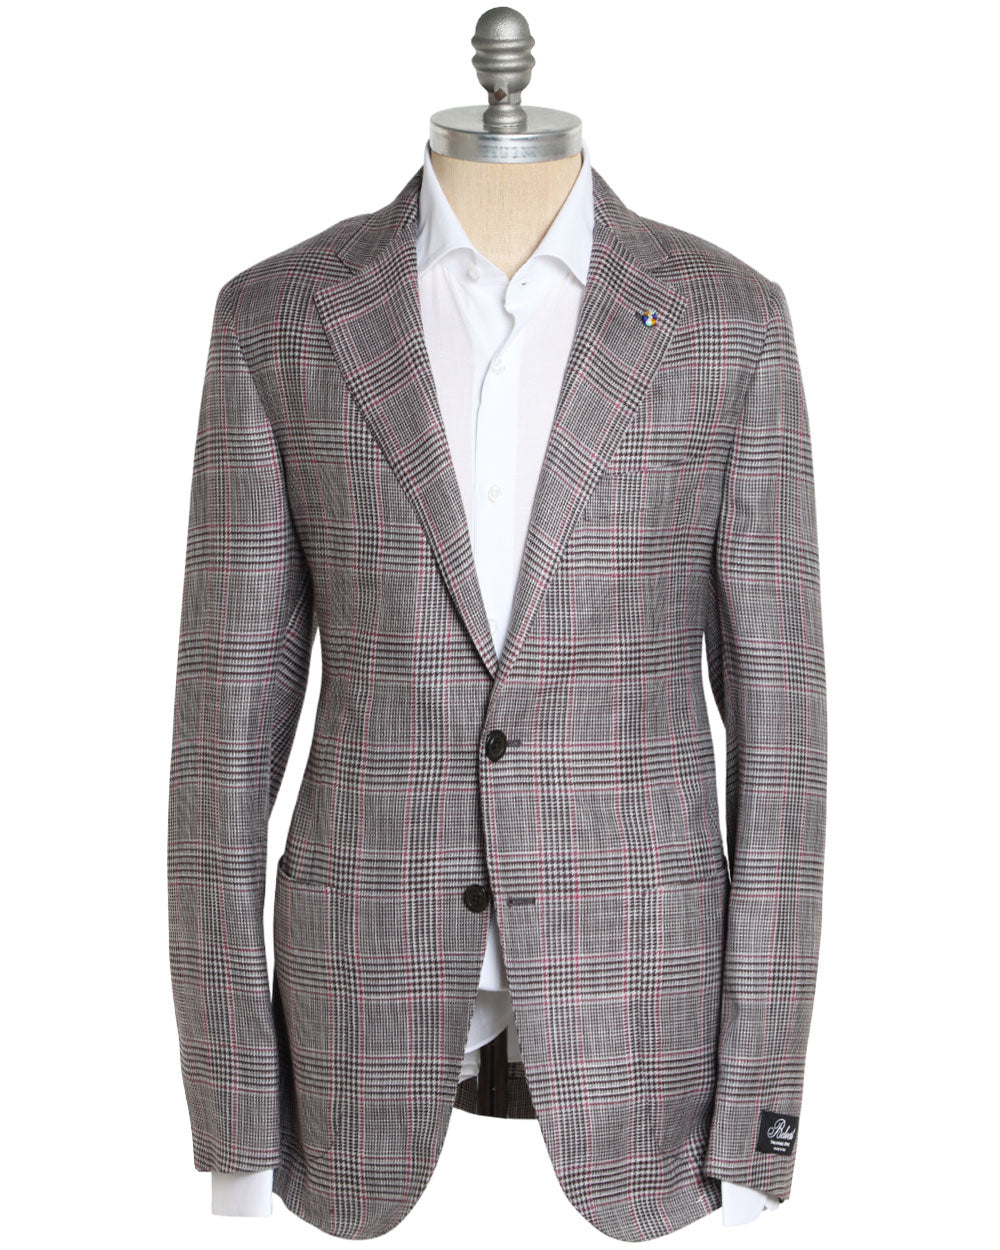 Grey and Burgundy Wool Blend Plaid Sportcoat